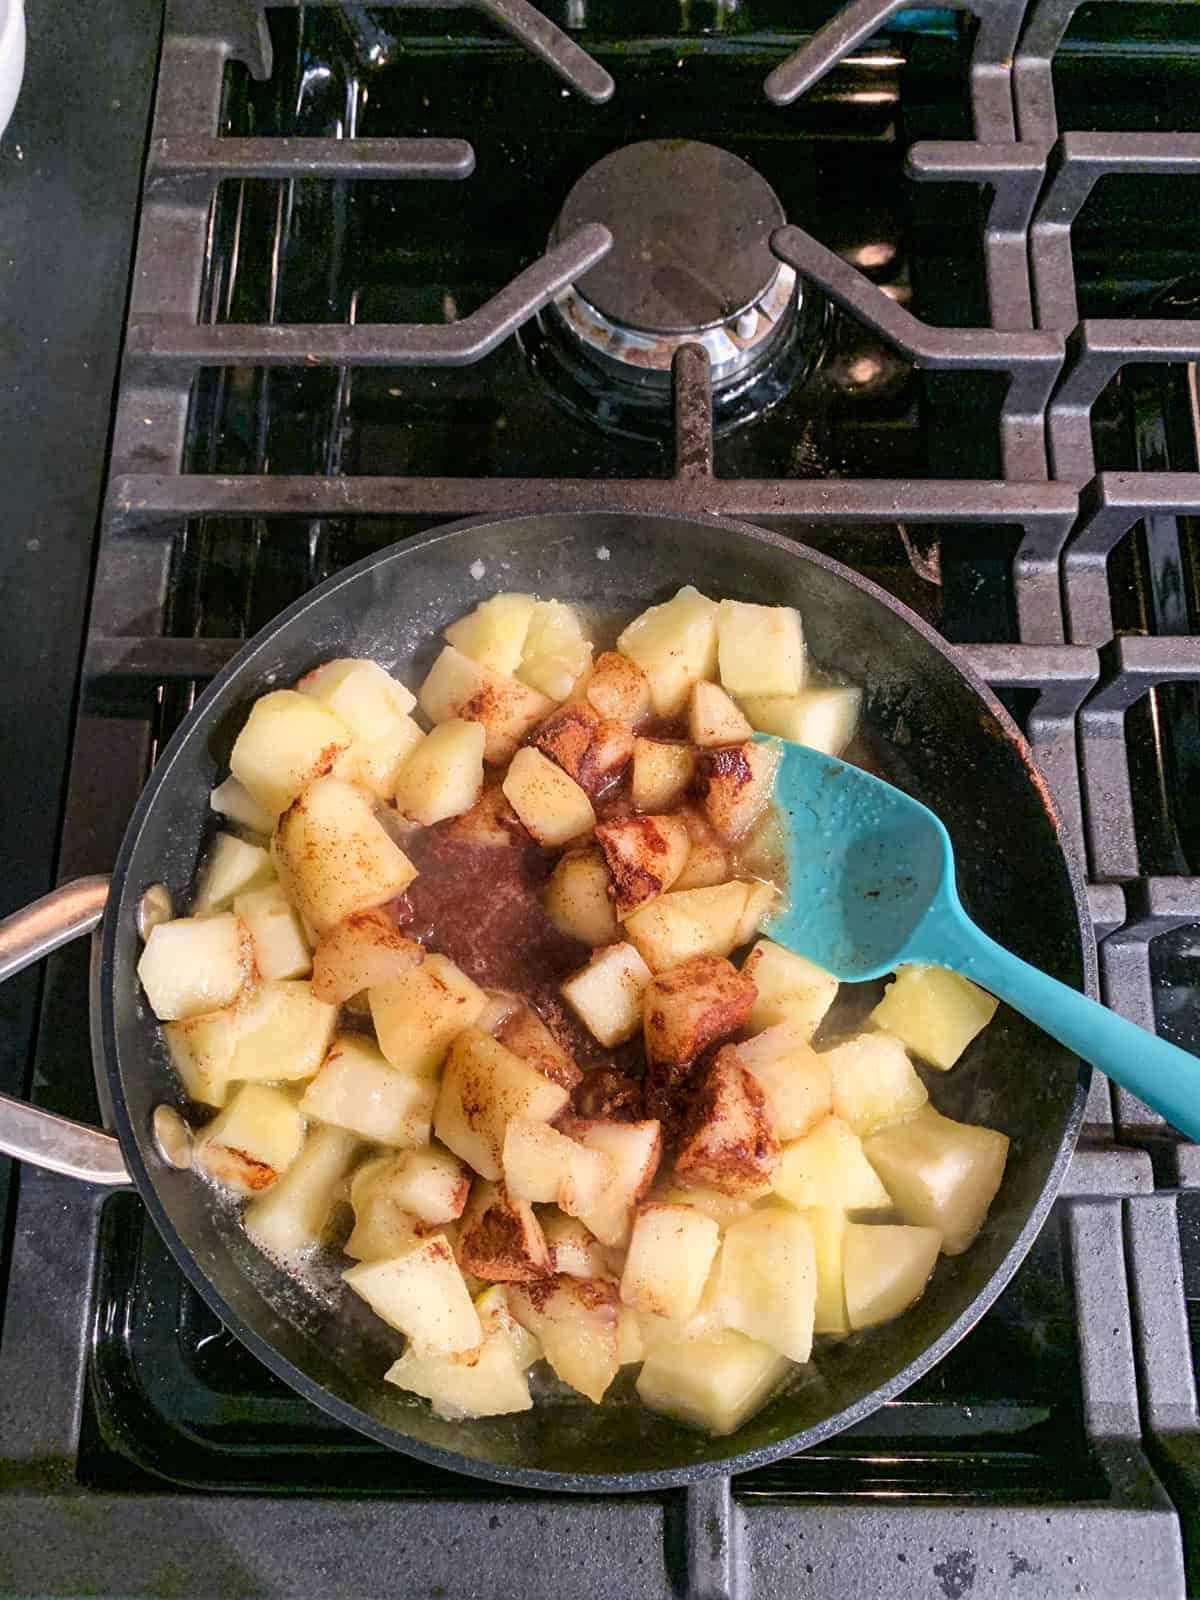 Cinnamon and maple syrup added to a skillet of diced fruit.